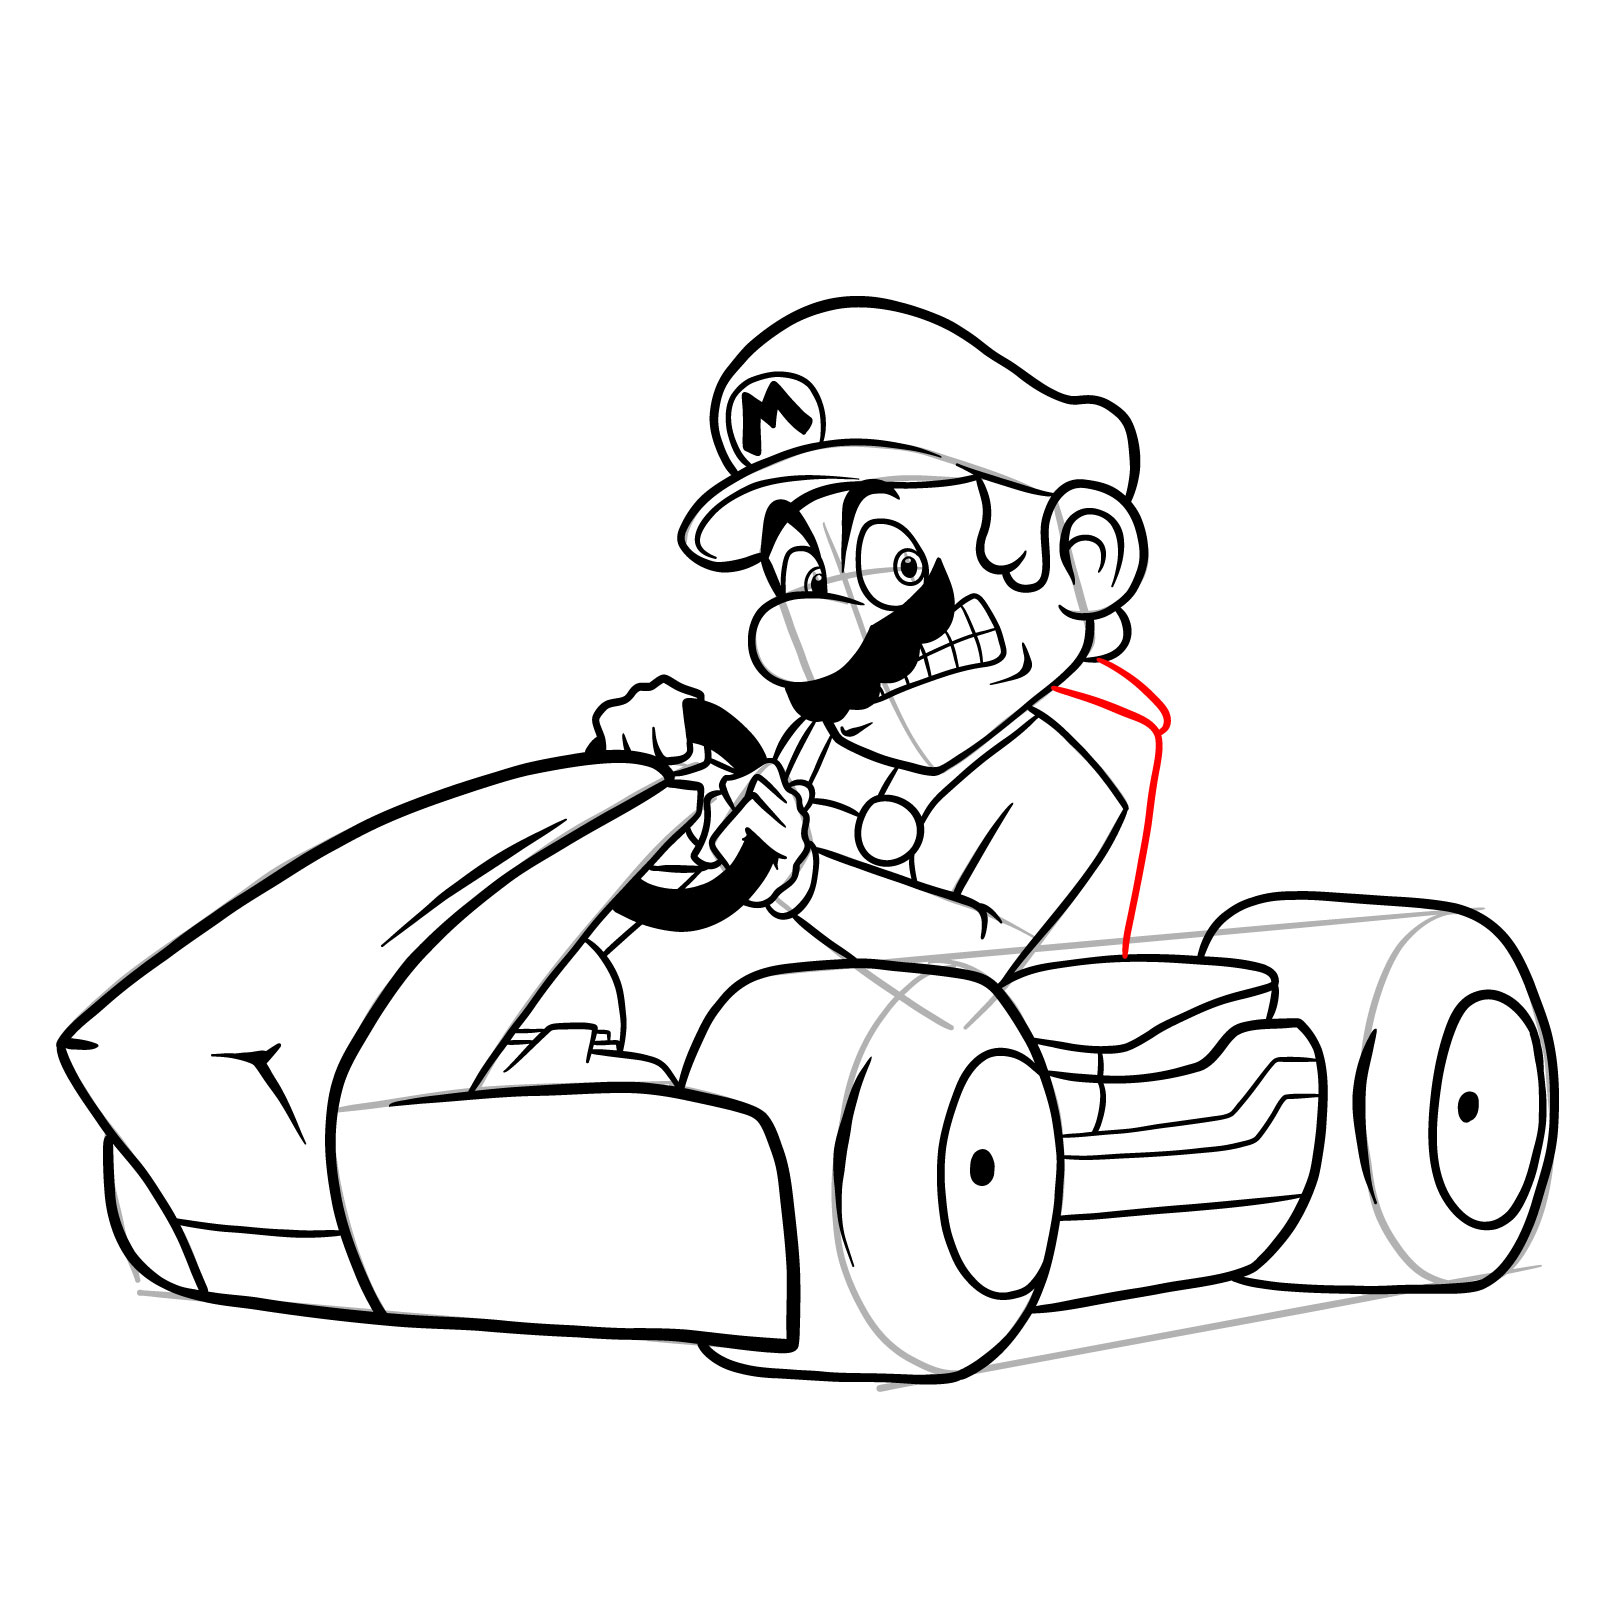 How to draw Race Traitors Mario - step 40